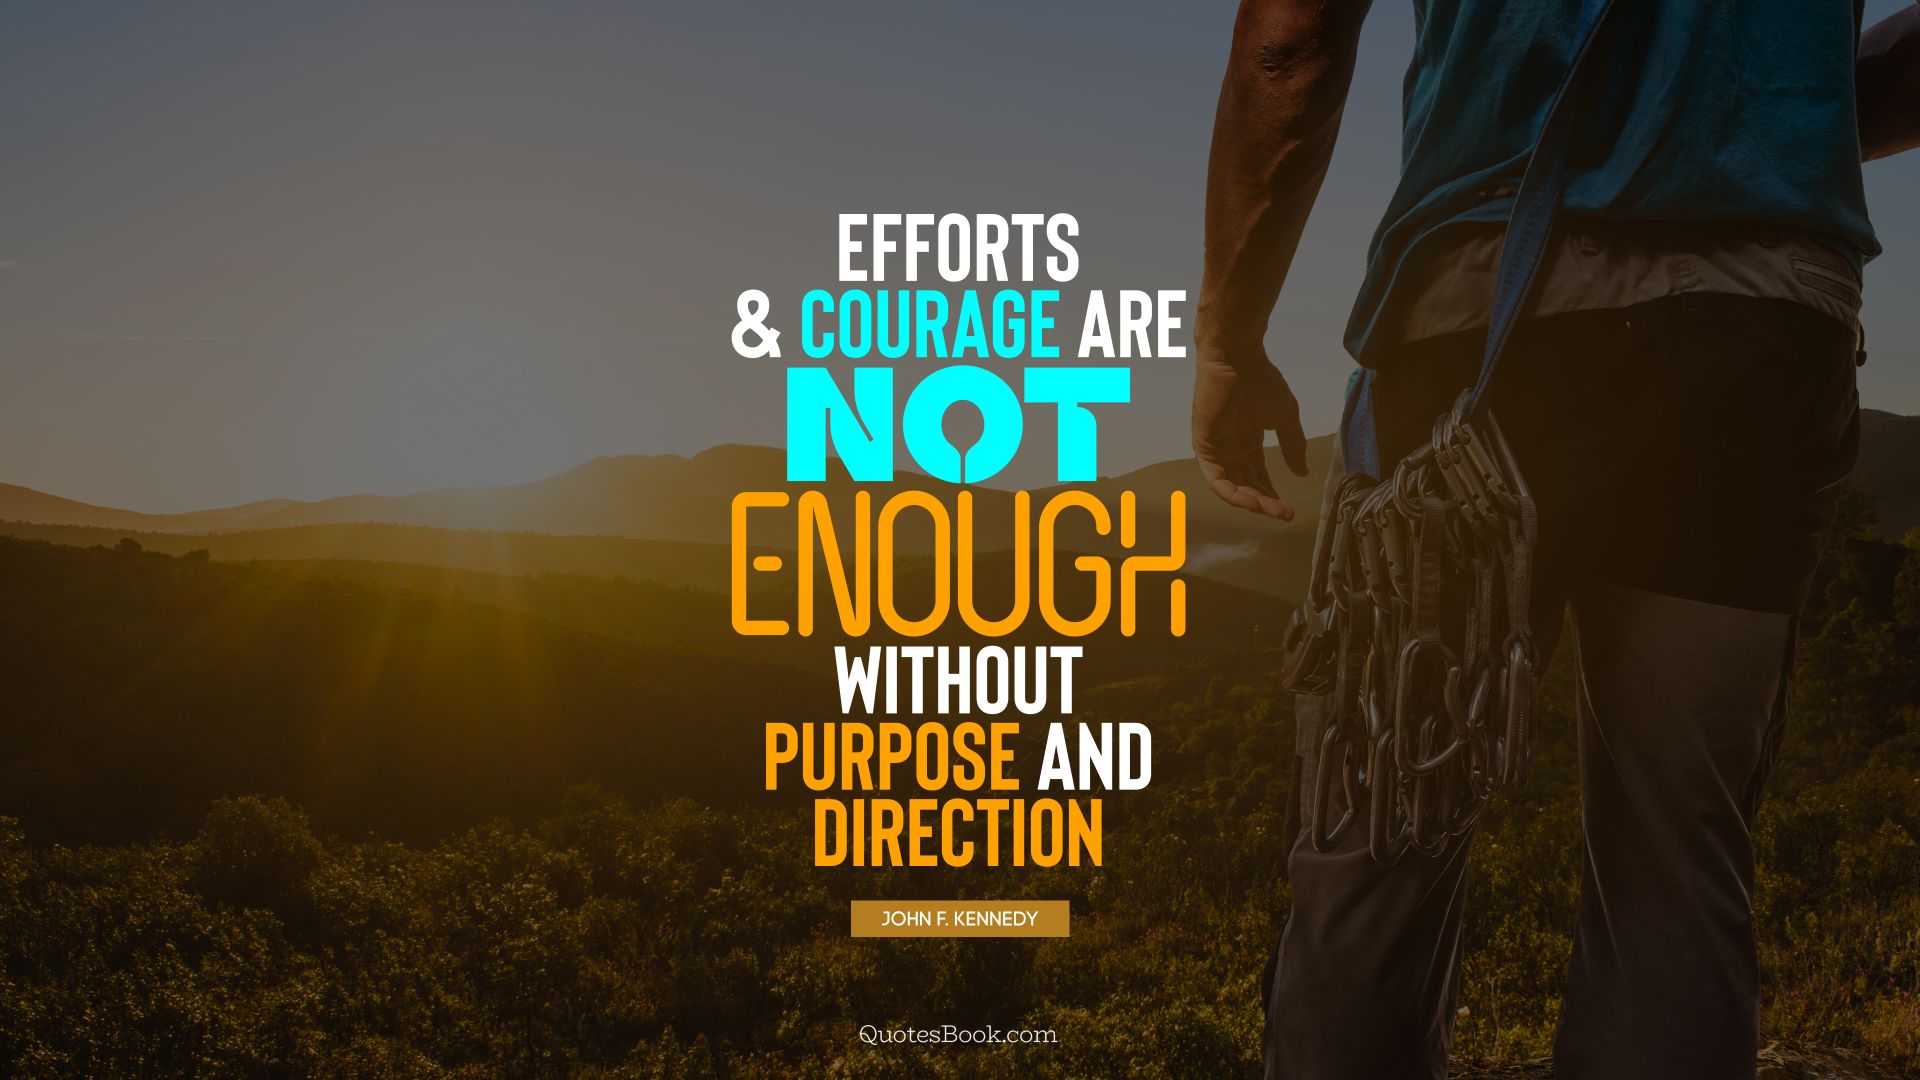 Efforts and courage are not enough without purpose and direction. - Quote by John F. Kennedy